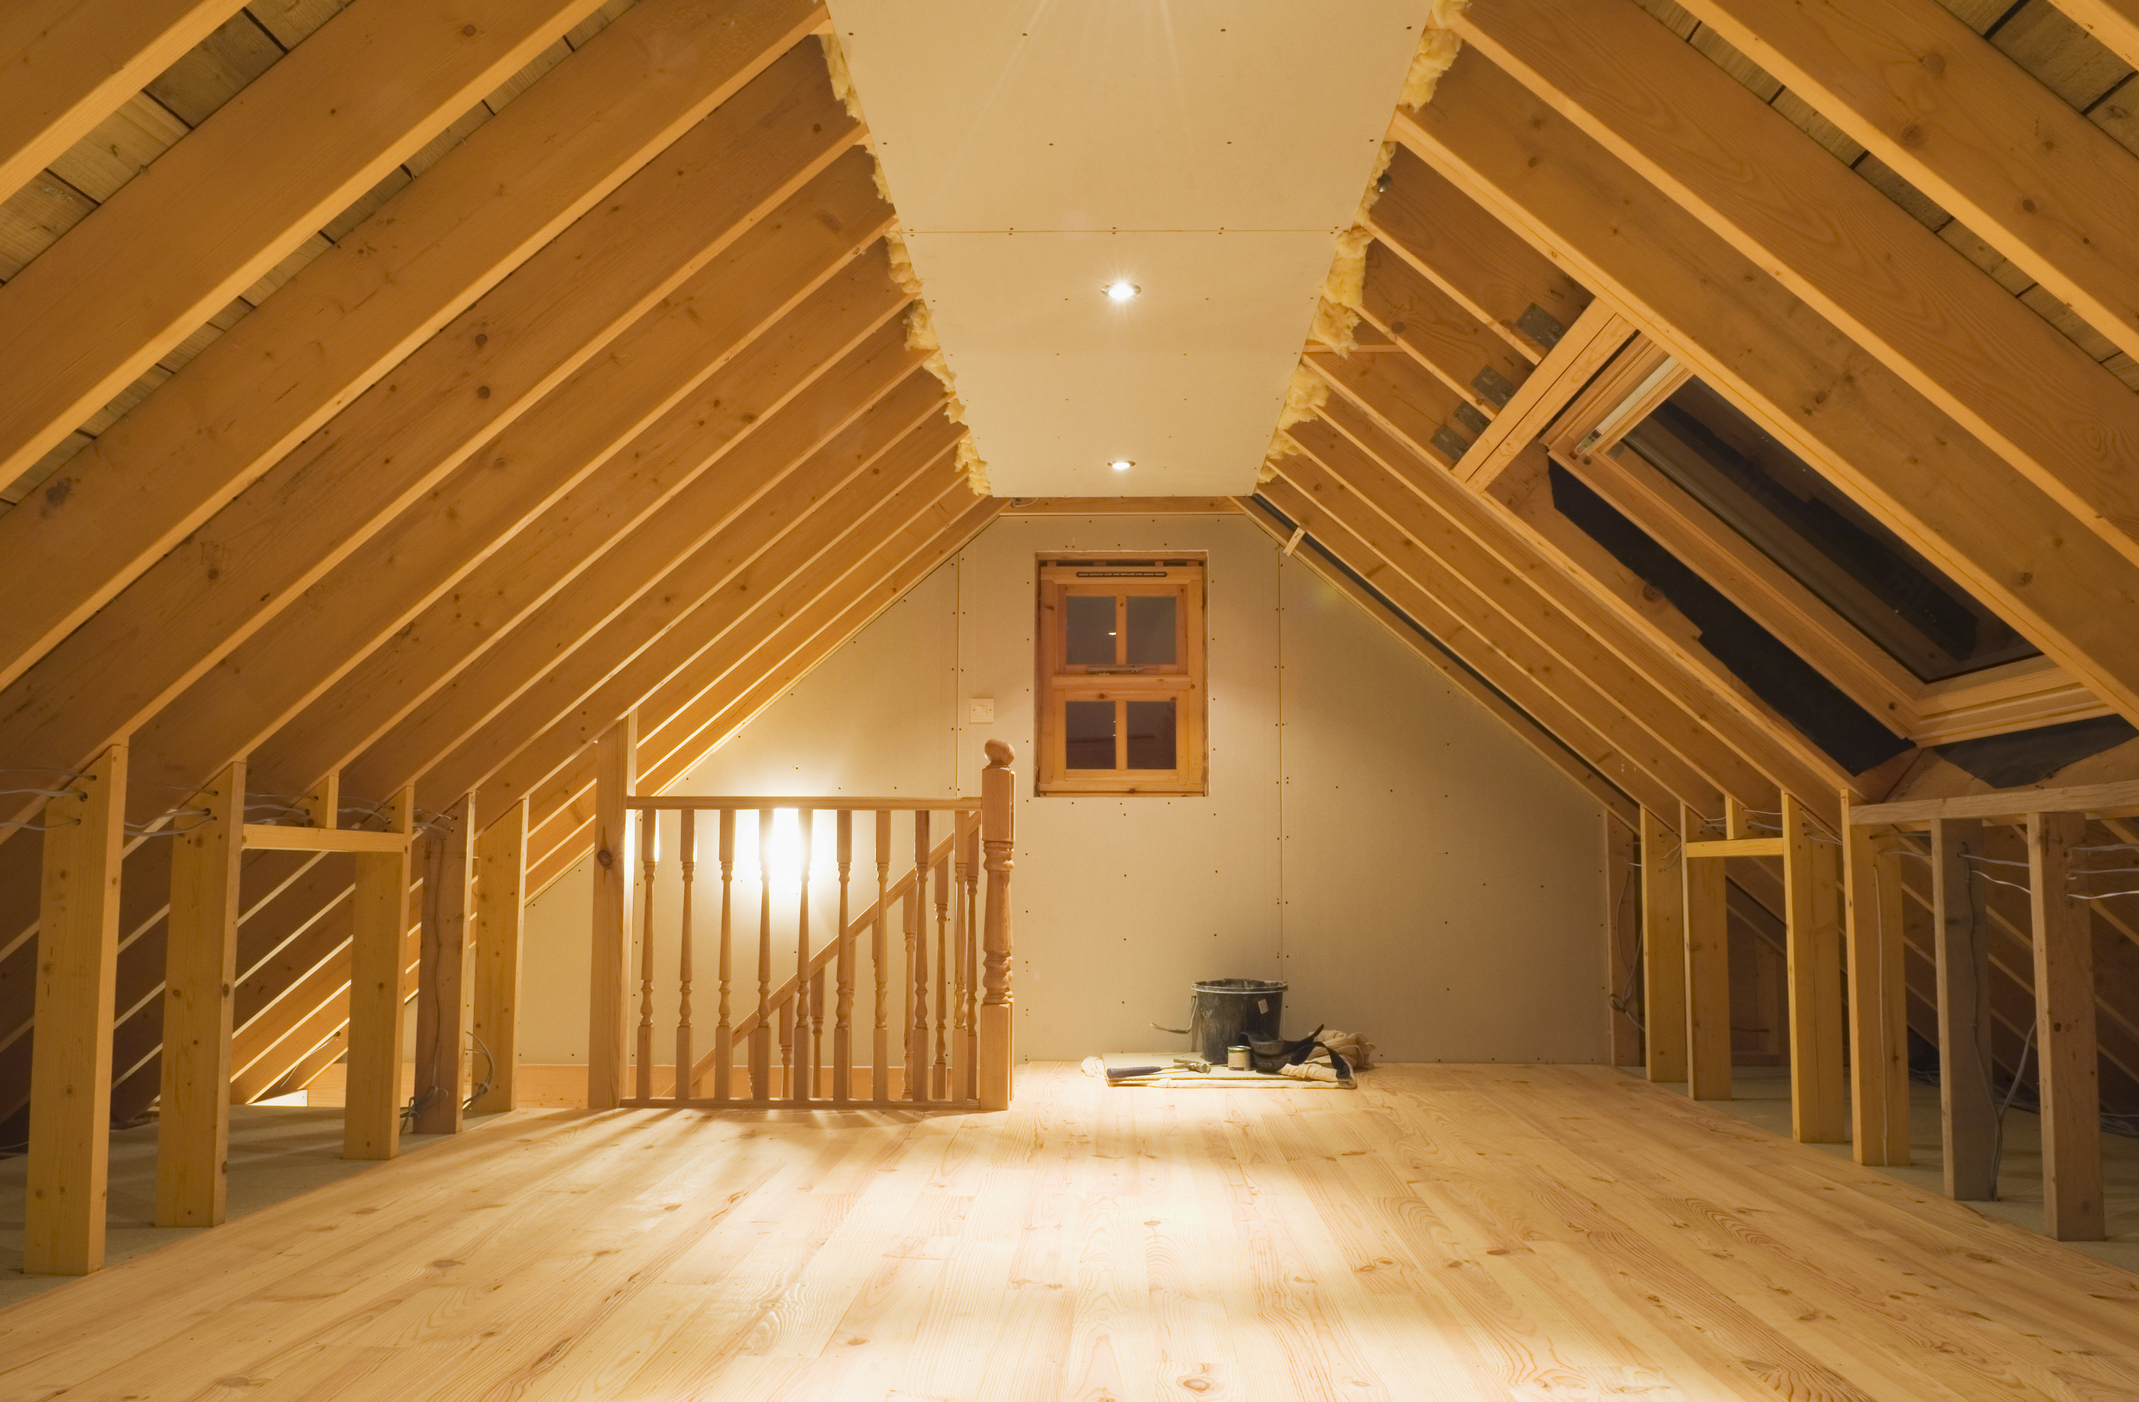 House attics: Everything you need to know